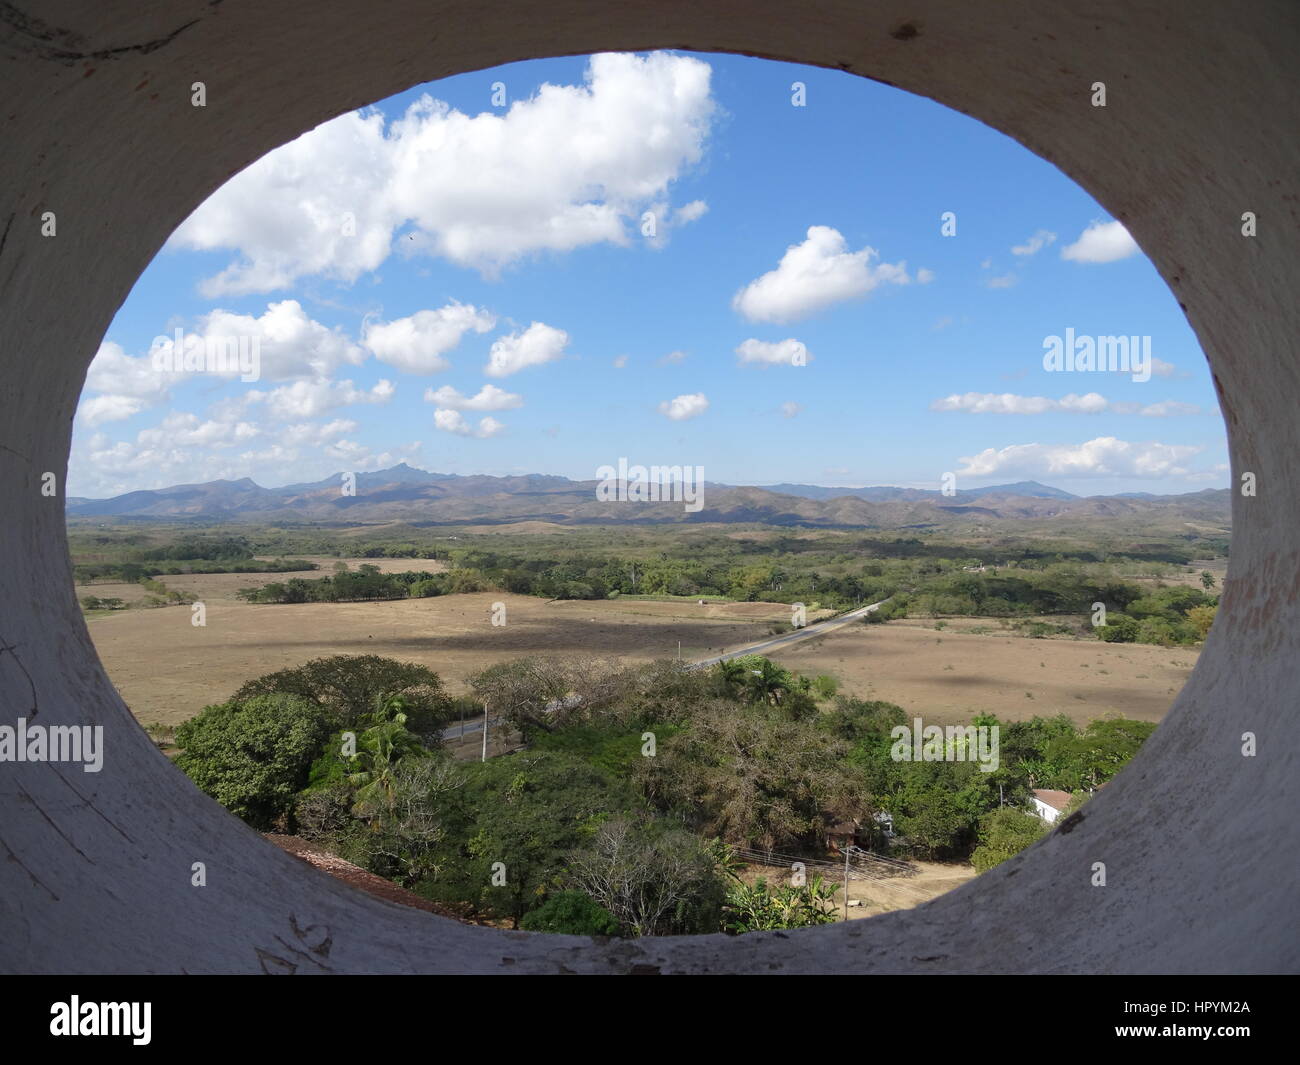 Aerial view framed by oval wall of the countryside in the Valle de los Ingenios near Trinidad,Cuba Stock Photo